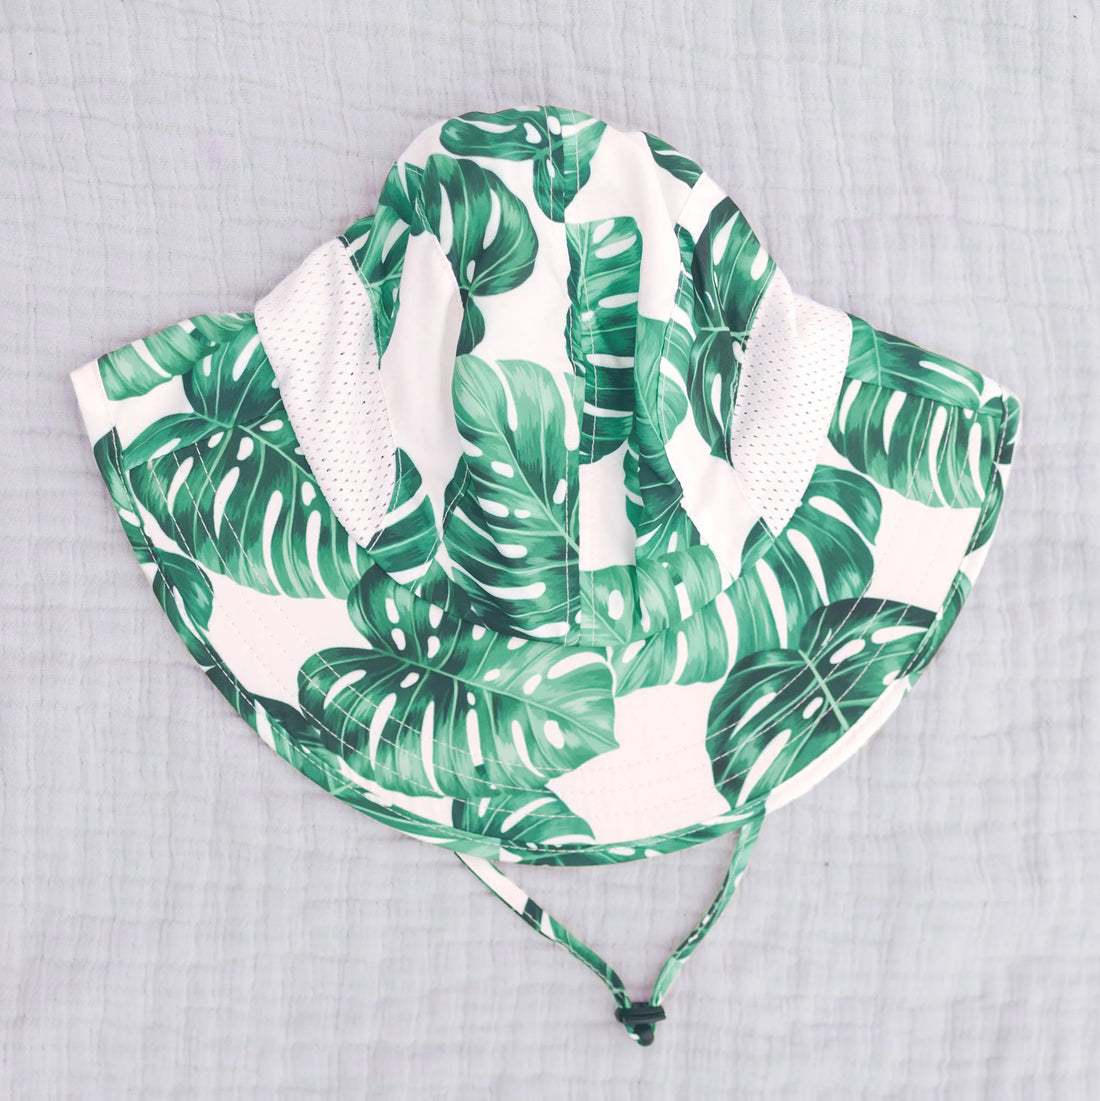 Honeysuckle Swim Co - Wide Brim Sunhat (Leaf) $15 sale - discount applied at checkout